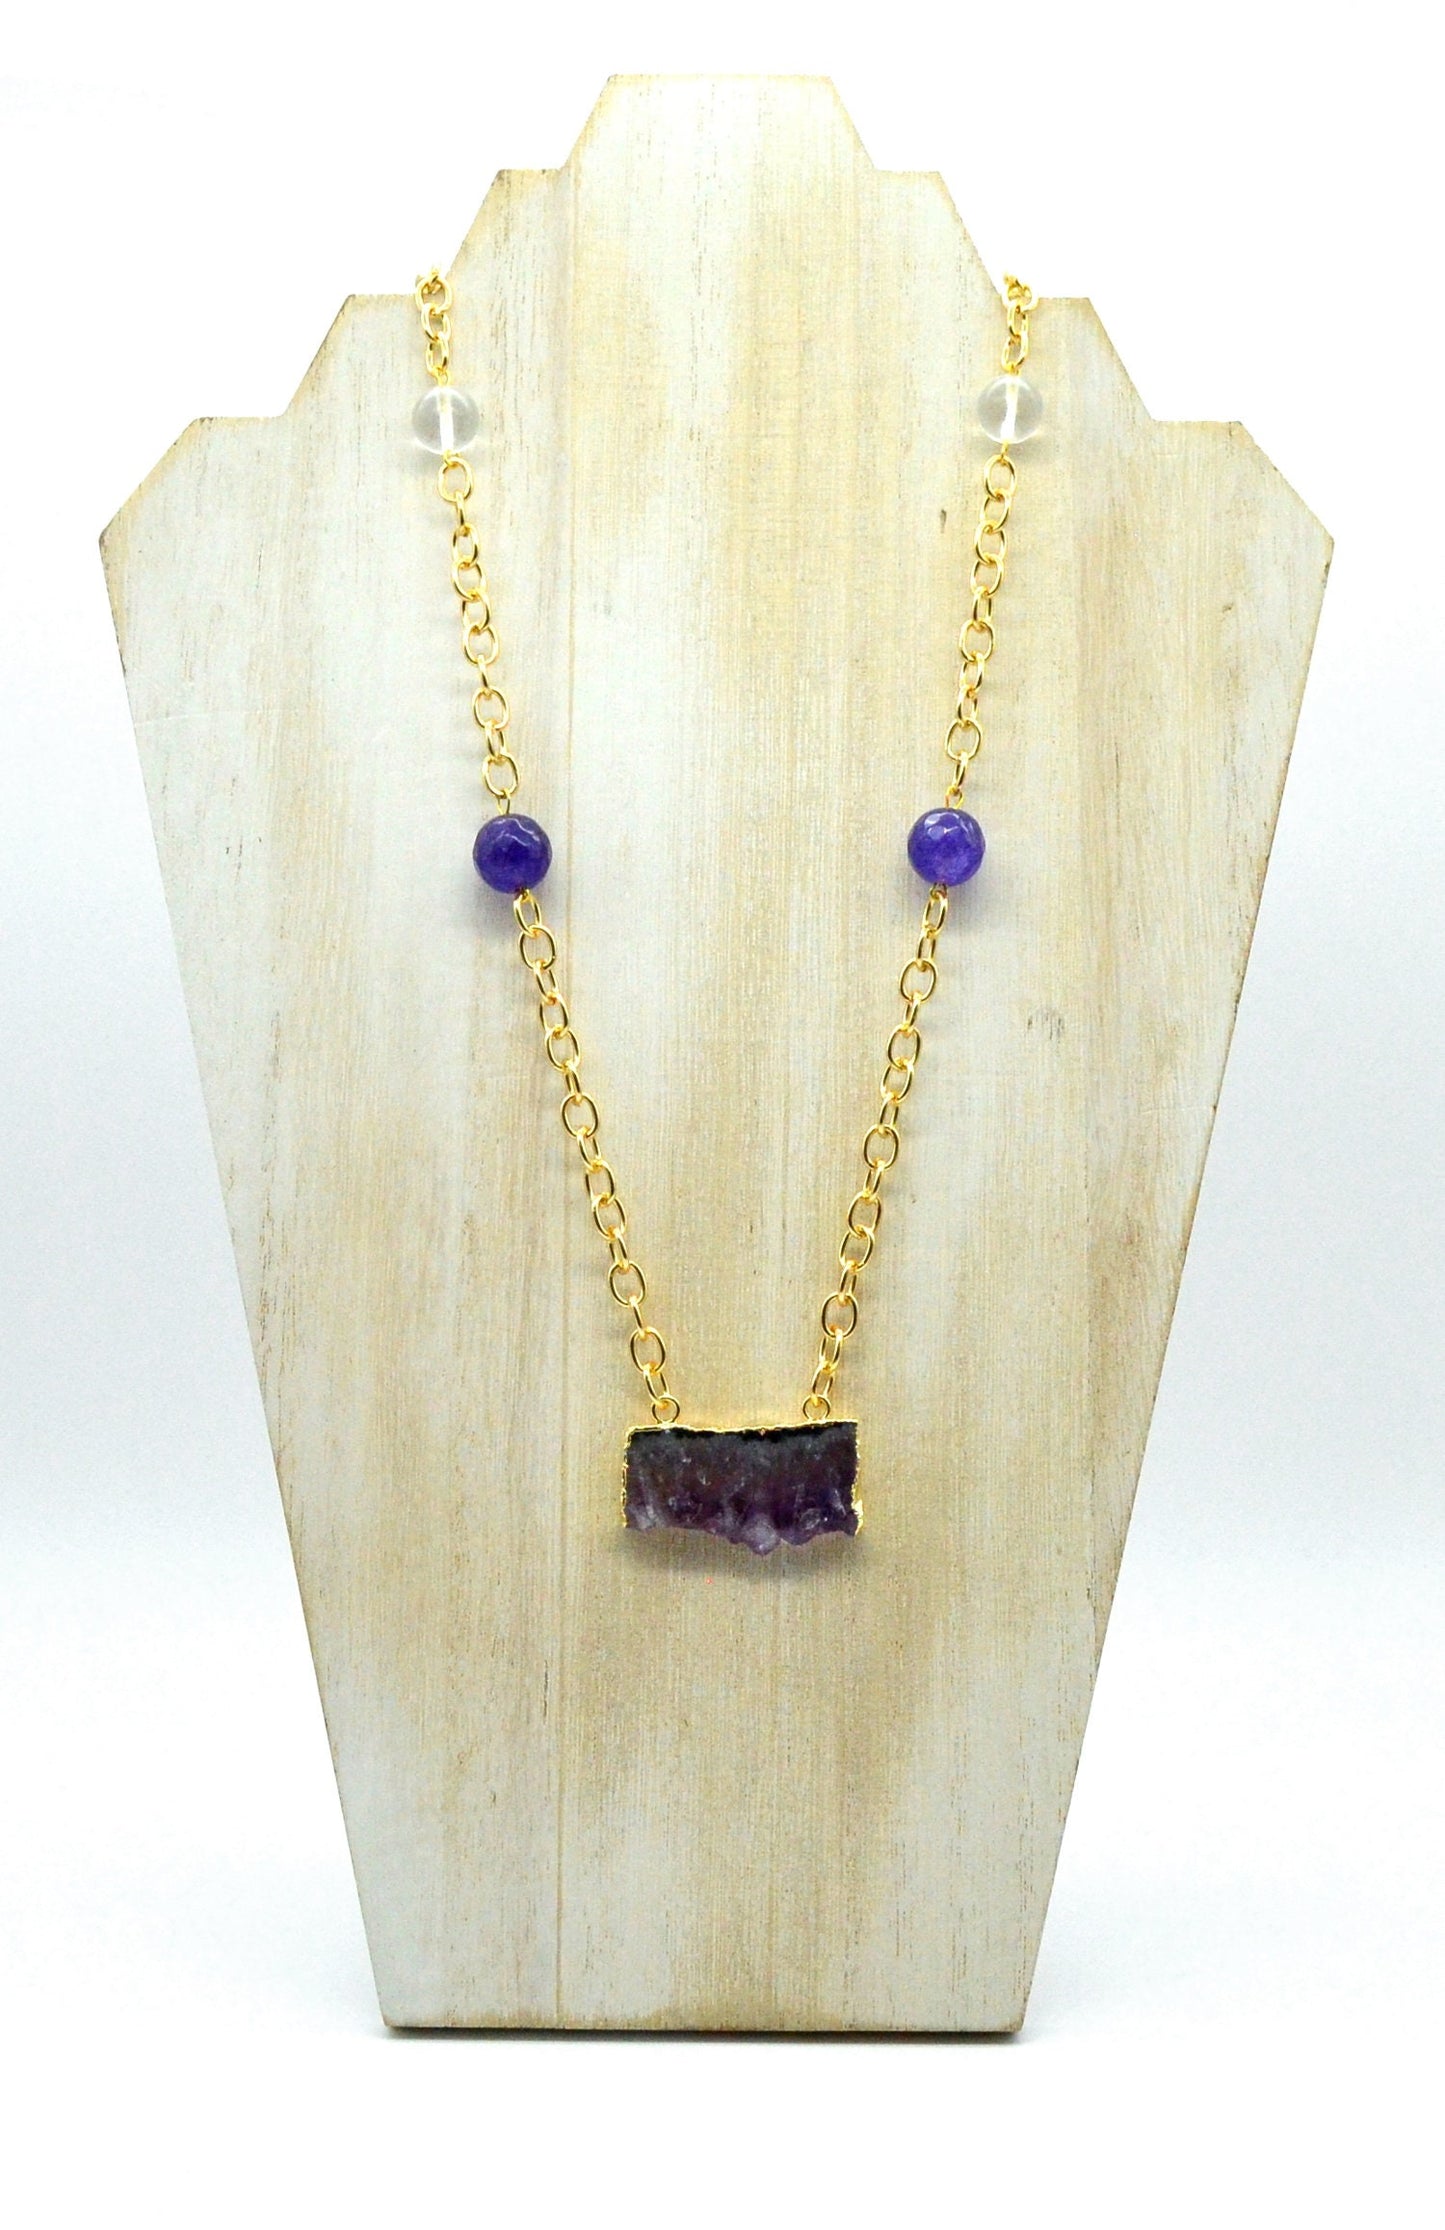 SALE Amethyst Couture Gemstone Beaded Bar Necklace